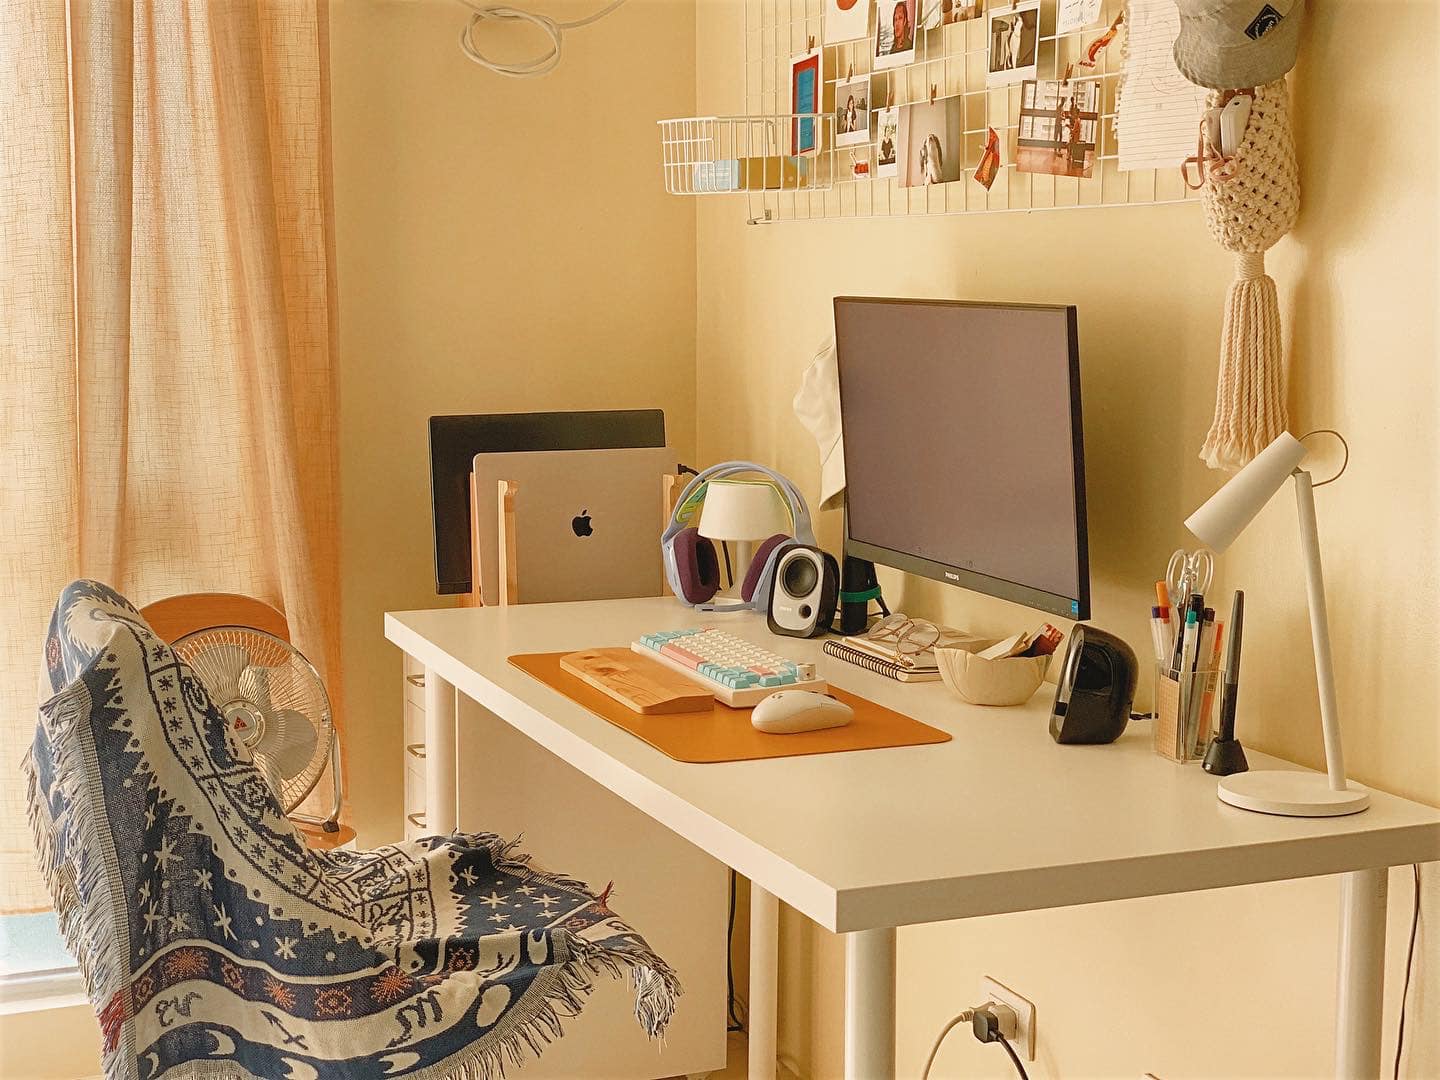 WFH Essentials for Your Home Office Setup » Lovely Indeed